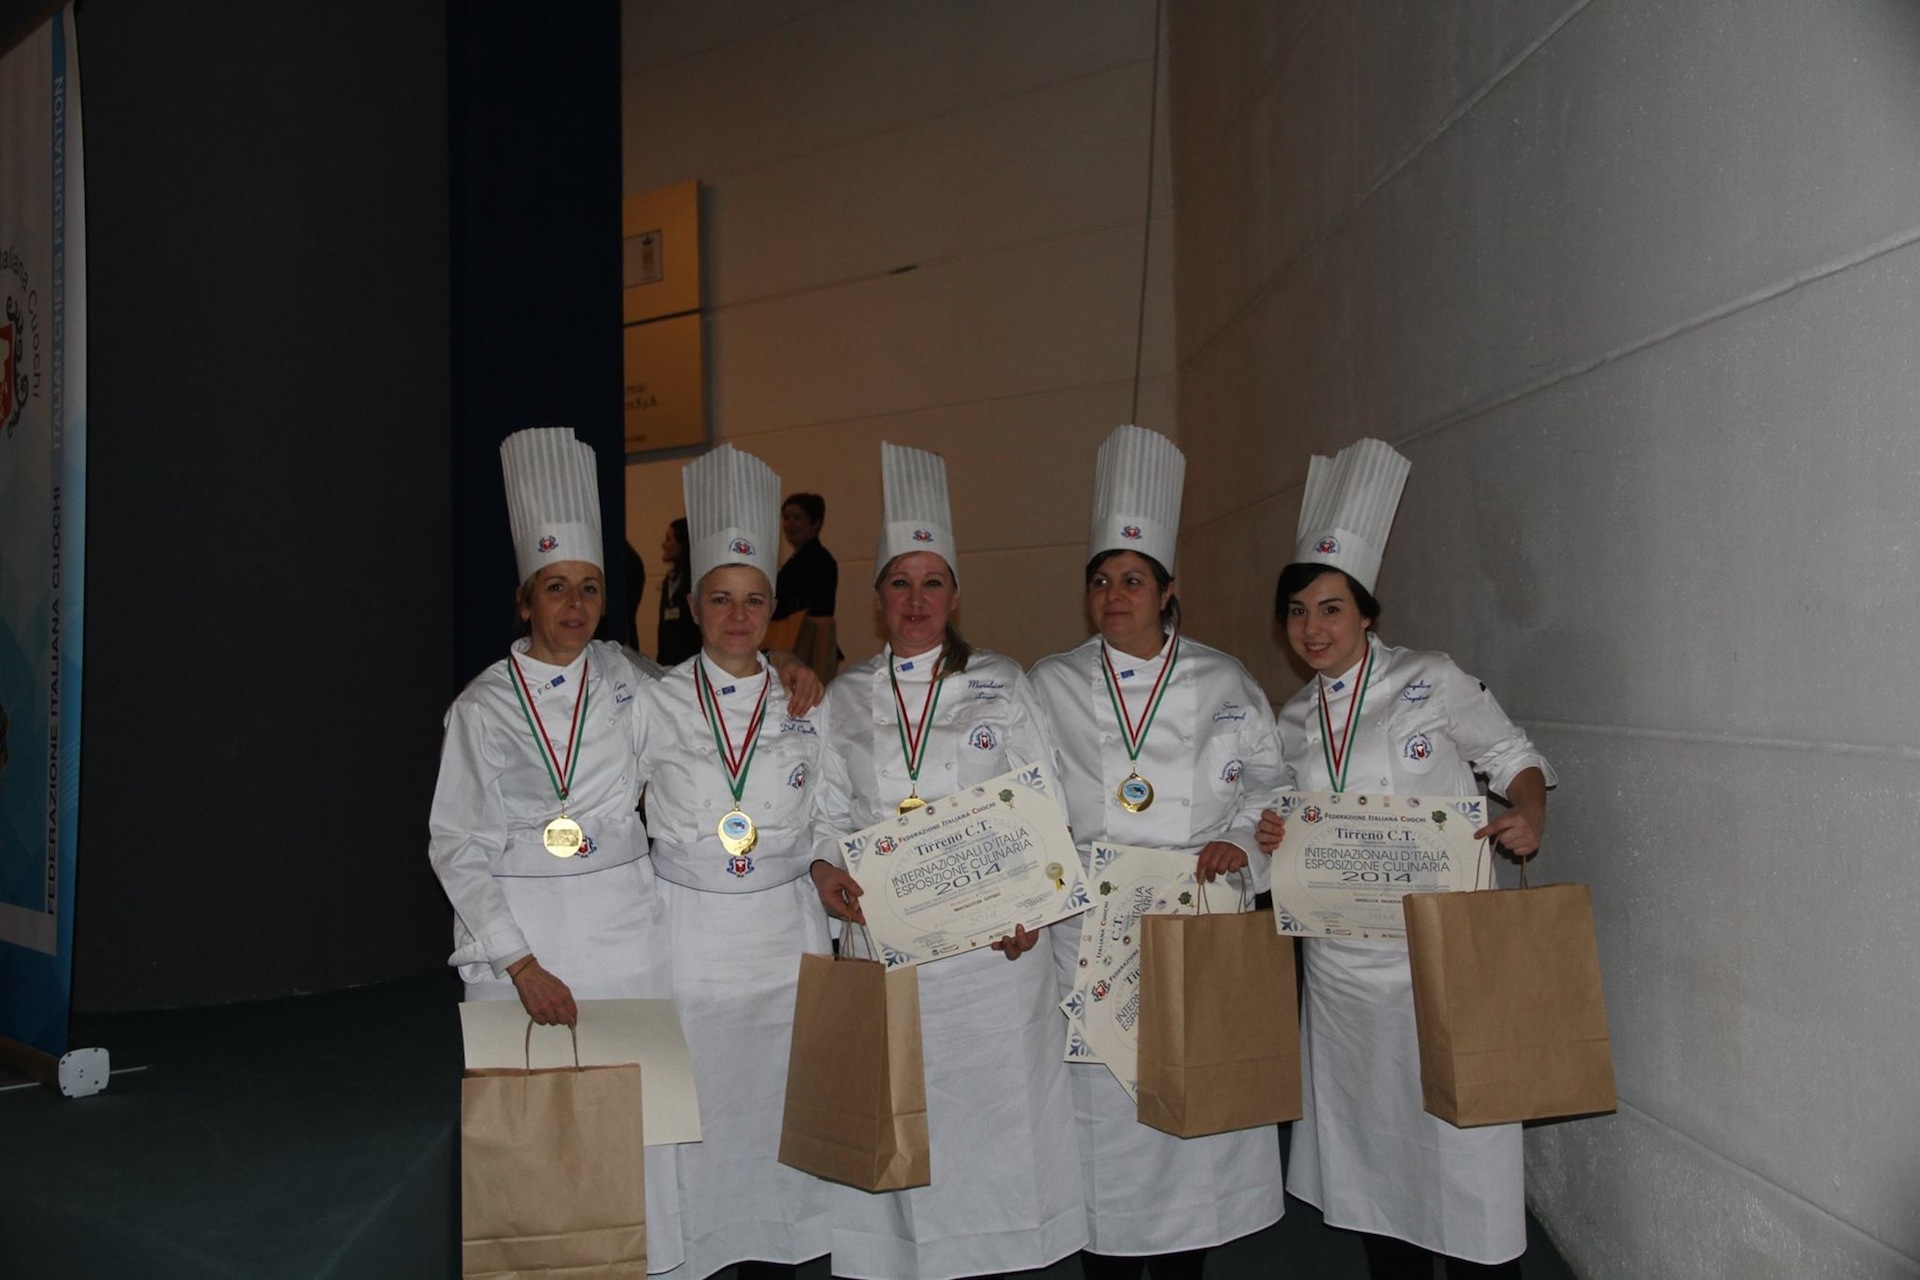 Enrica Romani is part of the women's team of Associazione Cuochi Arezzo that win gold medal at the International Italian Culinary Expo TIRRENO C.T.